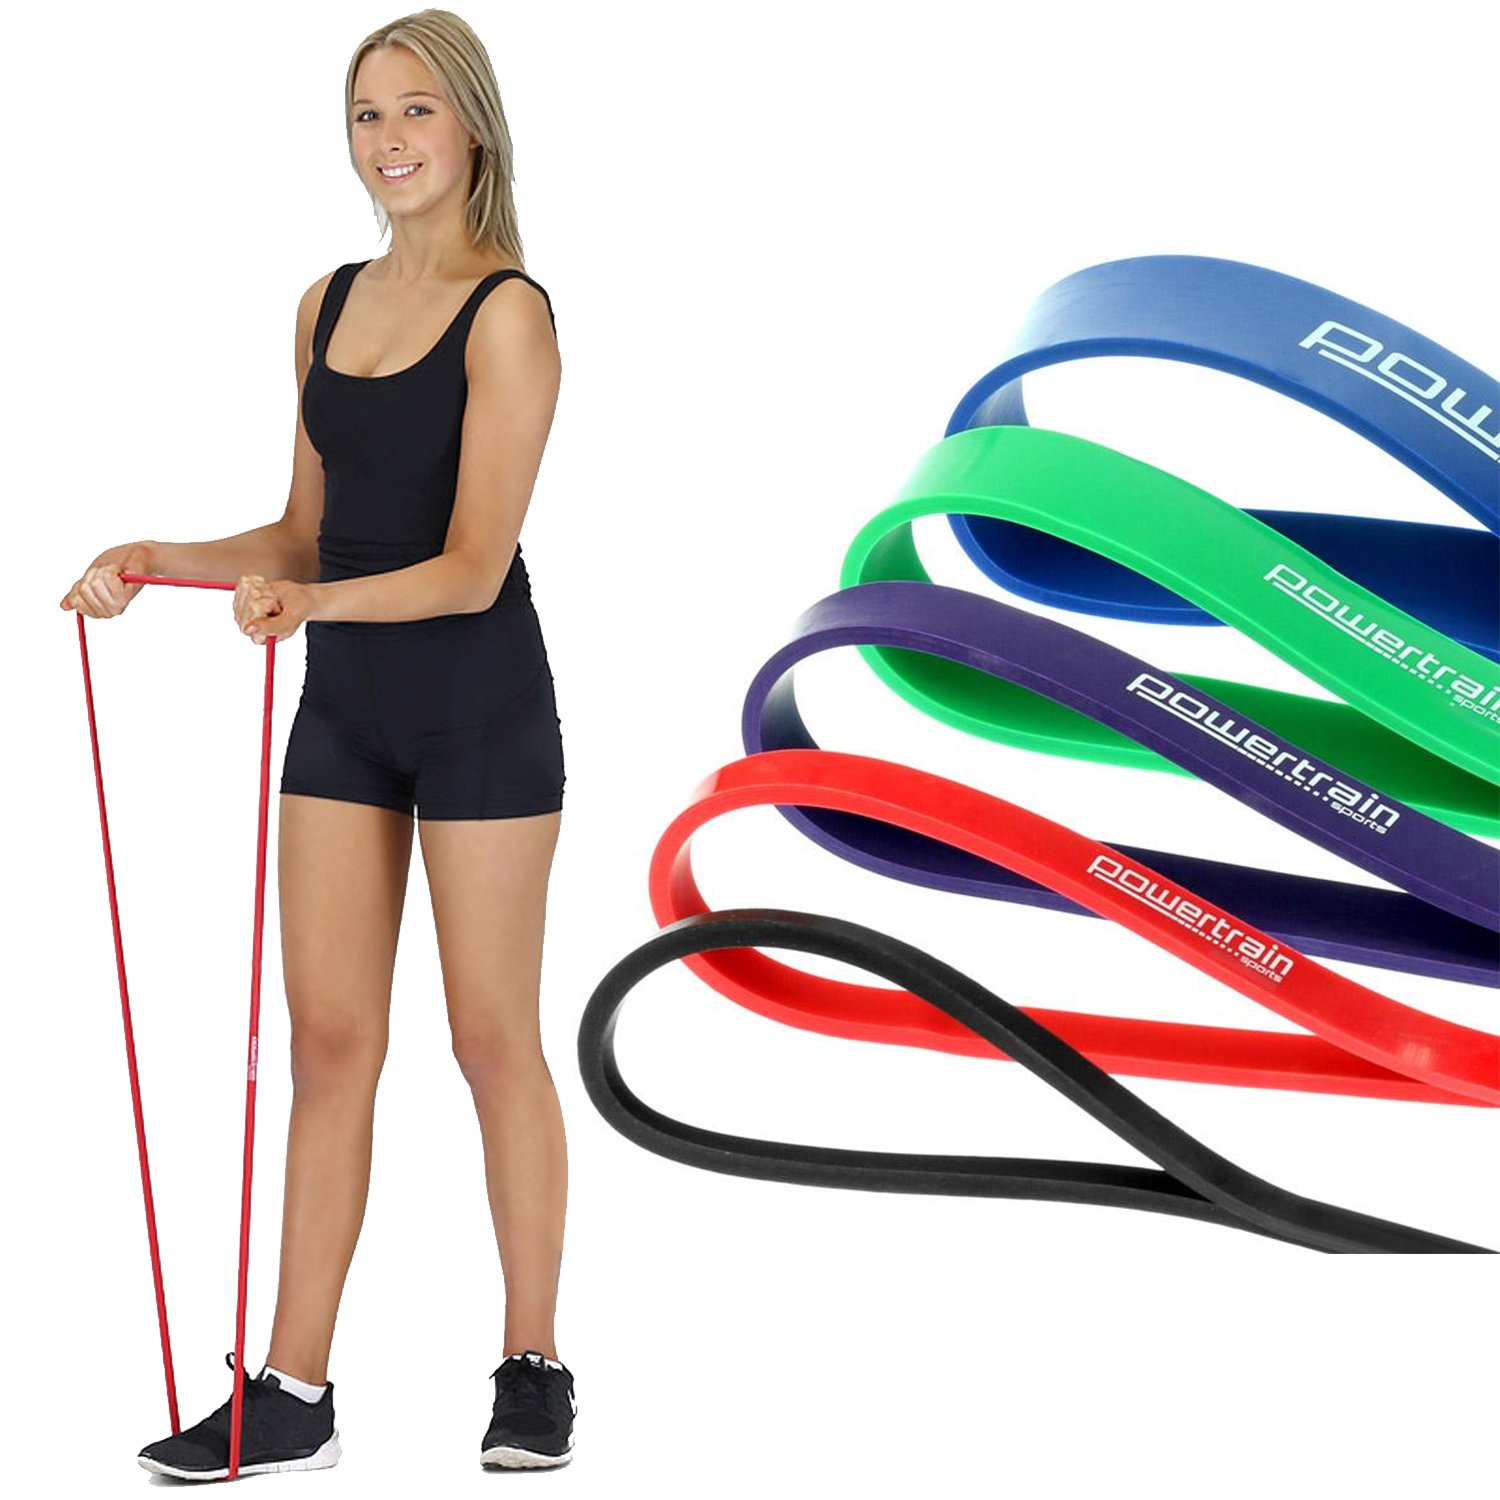 5x Powertrain Home Workout Resistance Bands Gym Exercise 2